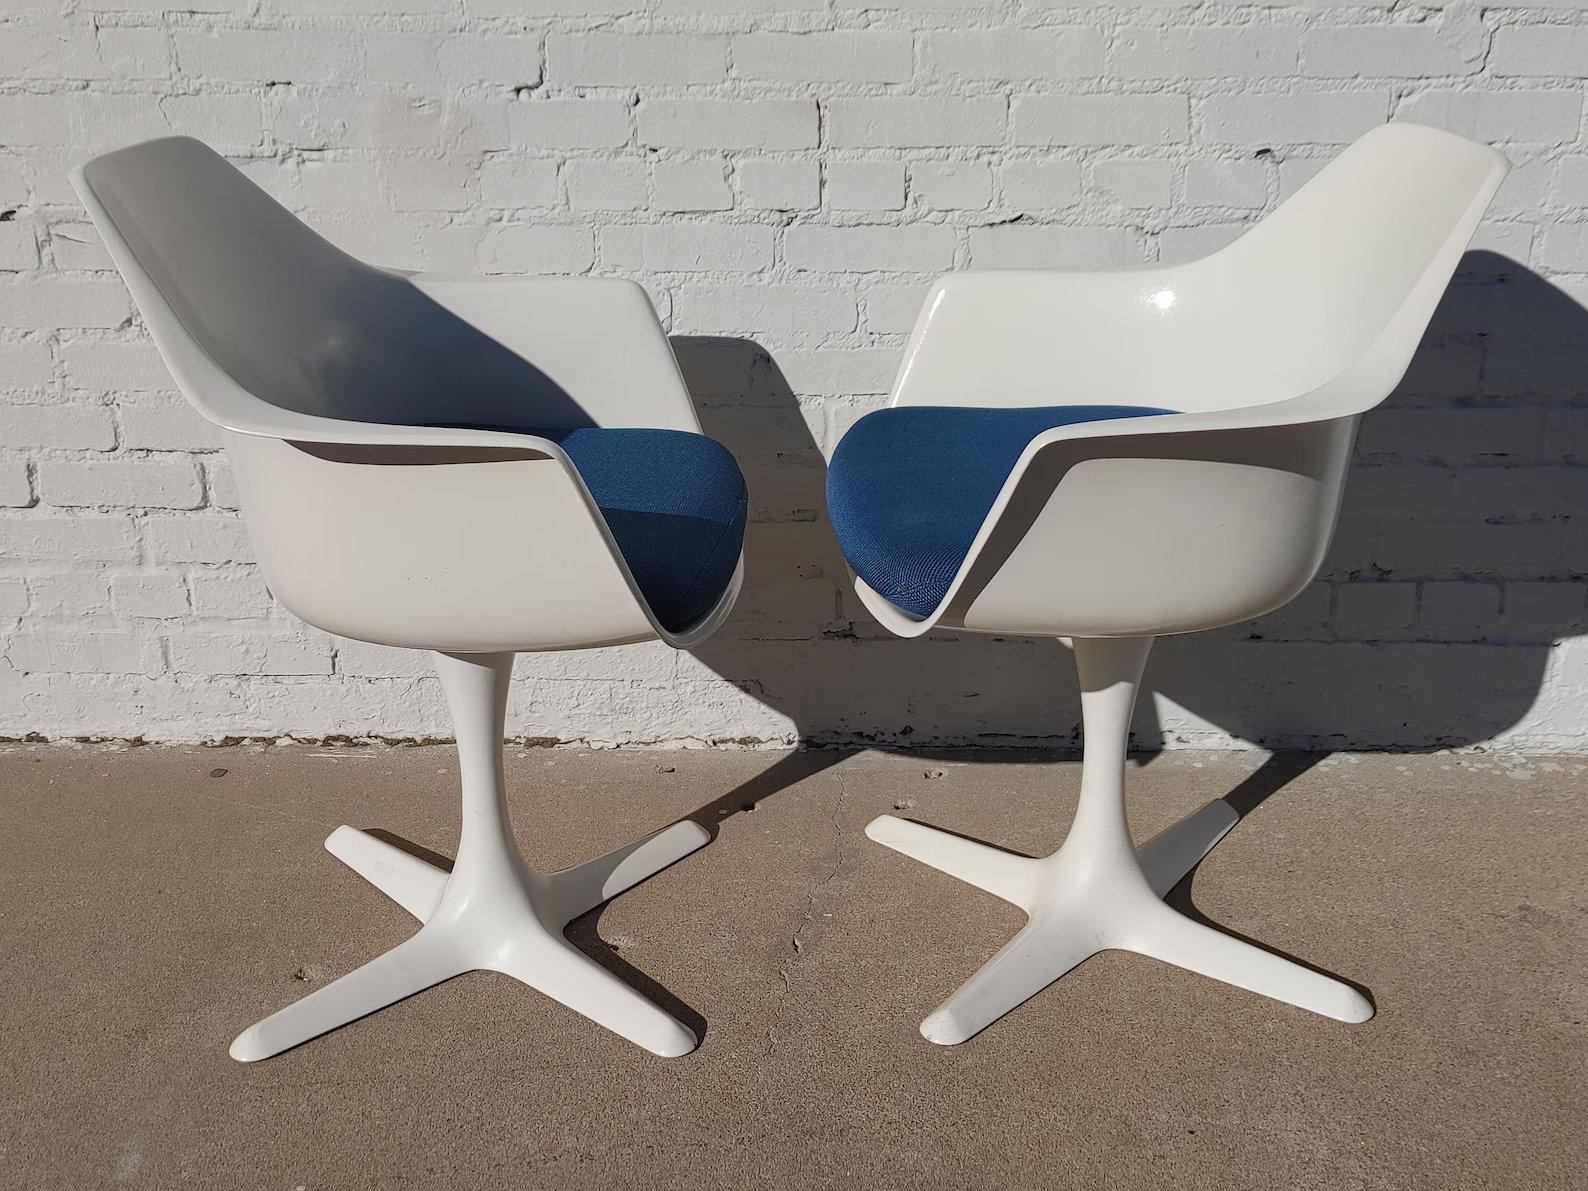 Set of 4 Mid Century Modern Burke Armed Tulip Chairs

Above average vintage condition and structurally sound. Has some expected slight finish wear, scratching, and very light seat soiling. Outdoor listing pictures might appear slightly darker or